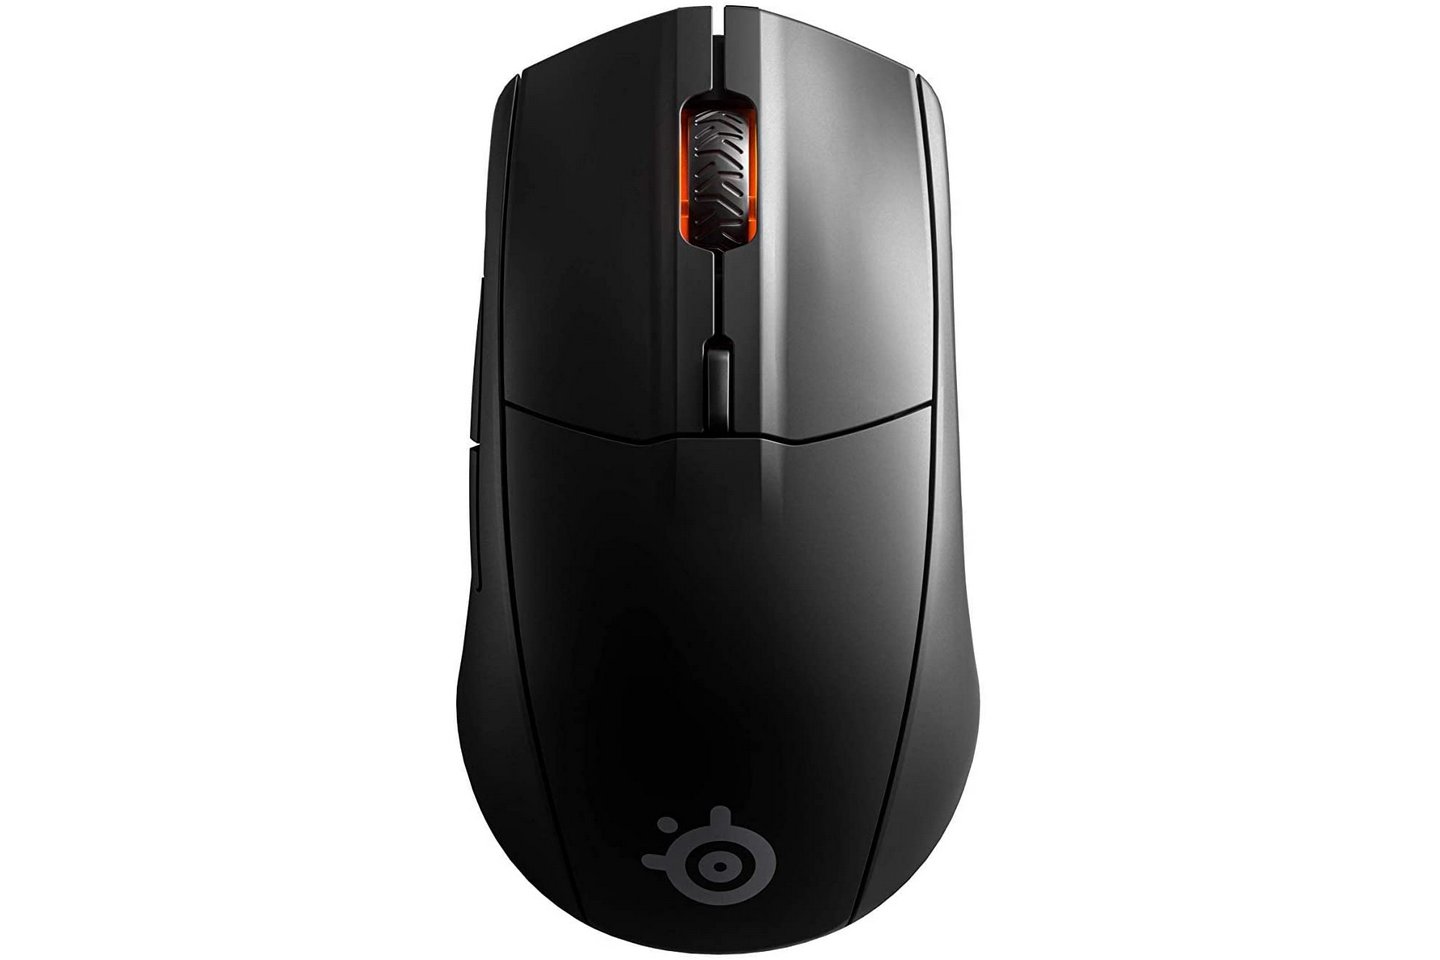 Chuột Steelseries Rival 3 Wireless